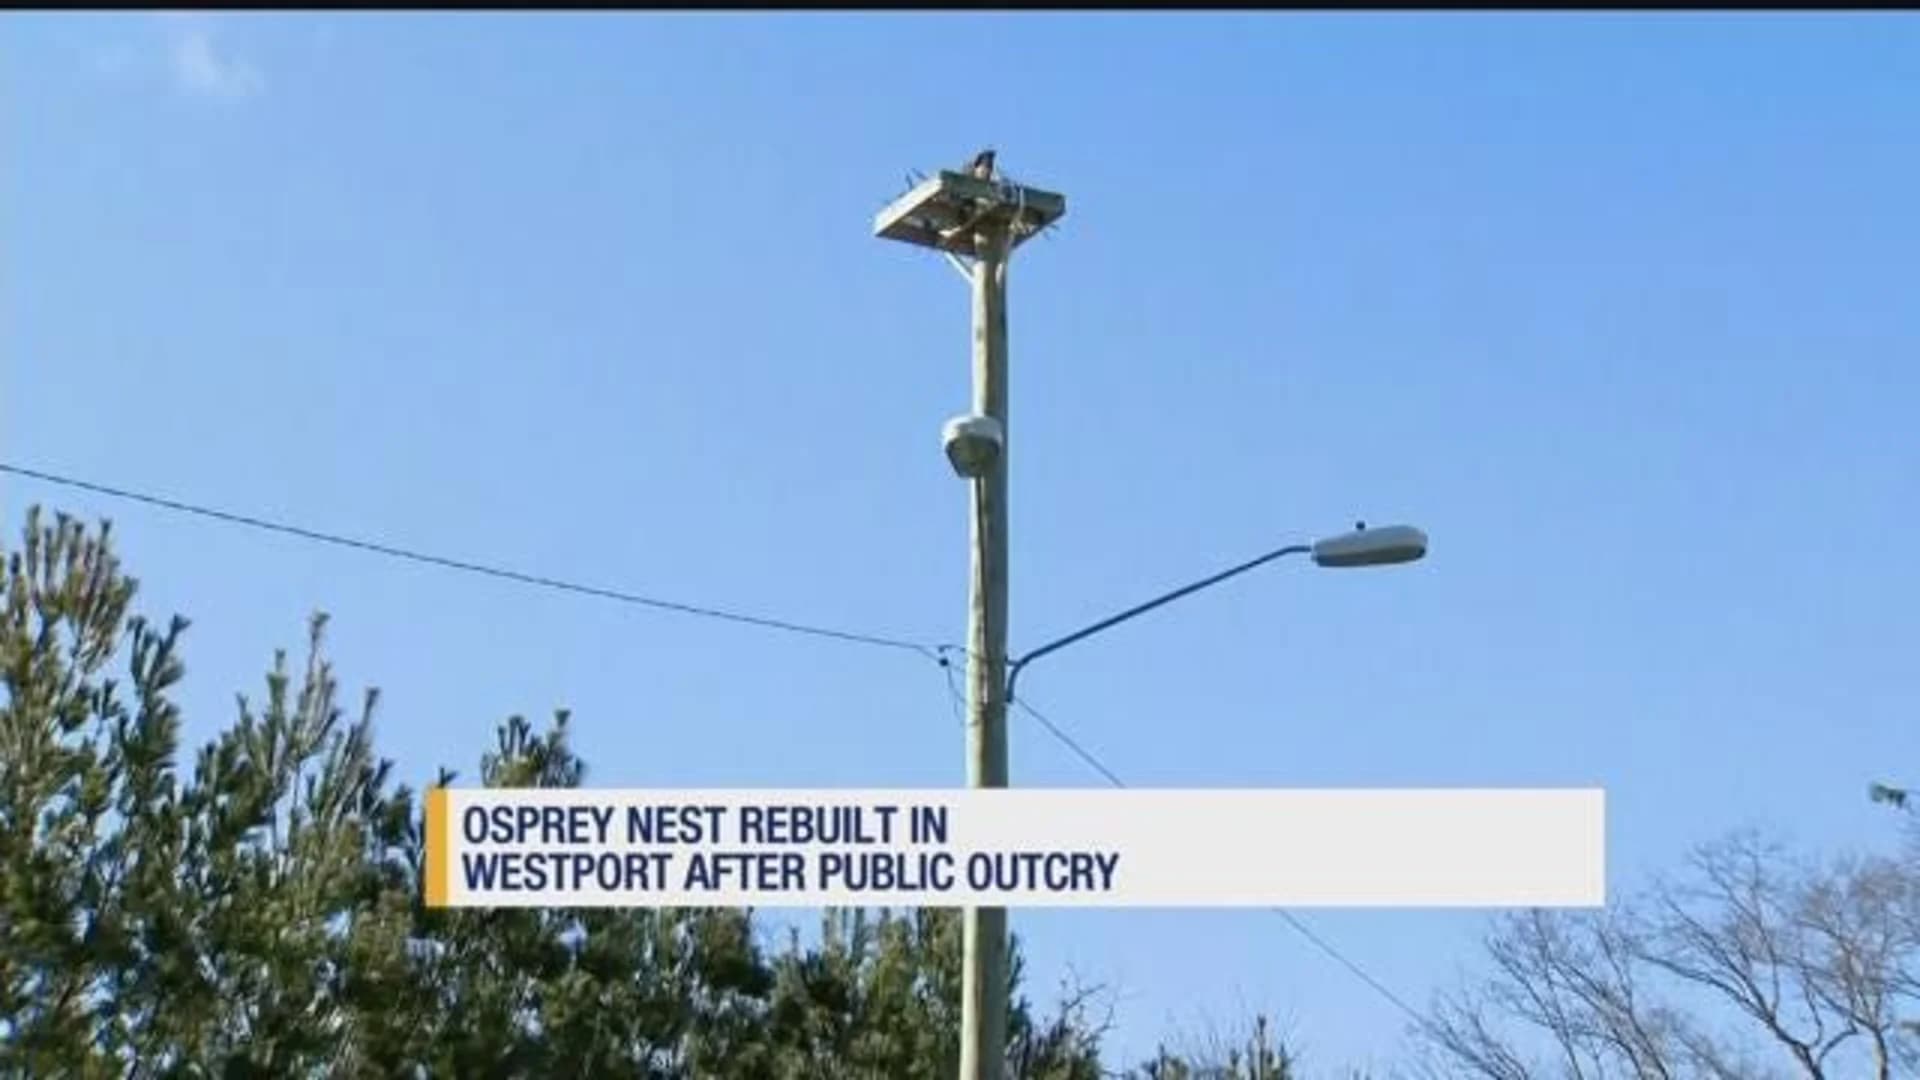 Company puts back osprey nest disturbed by construction at Westport plaza